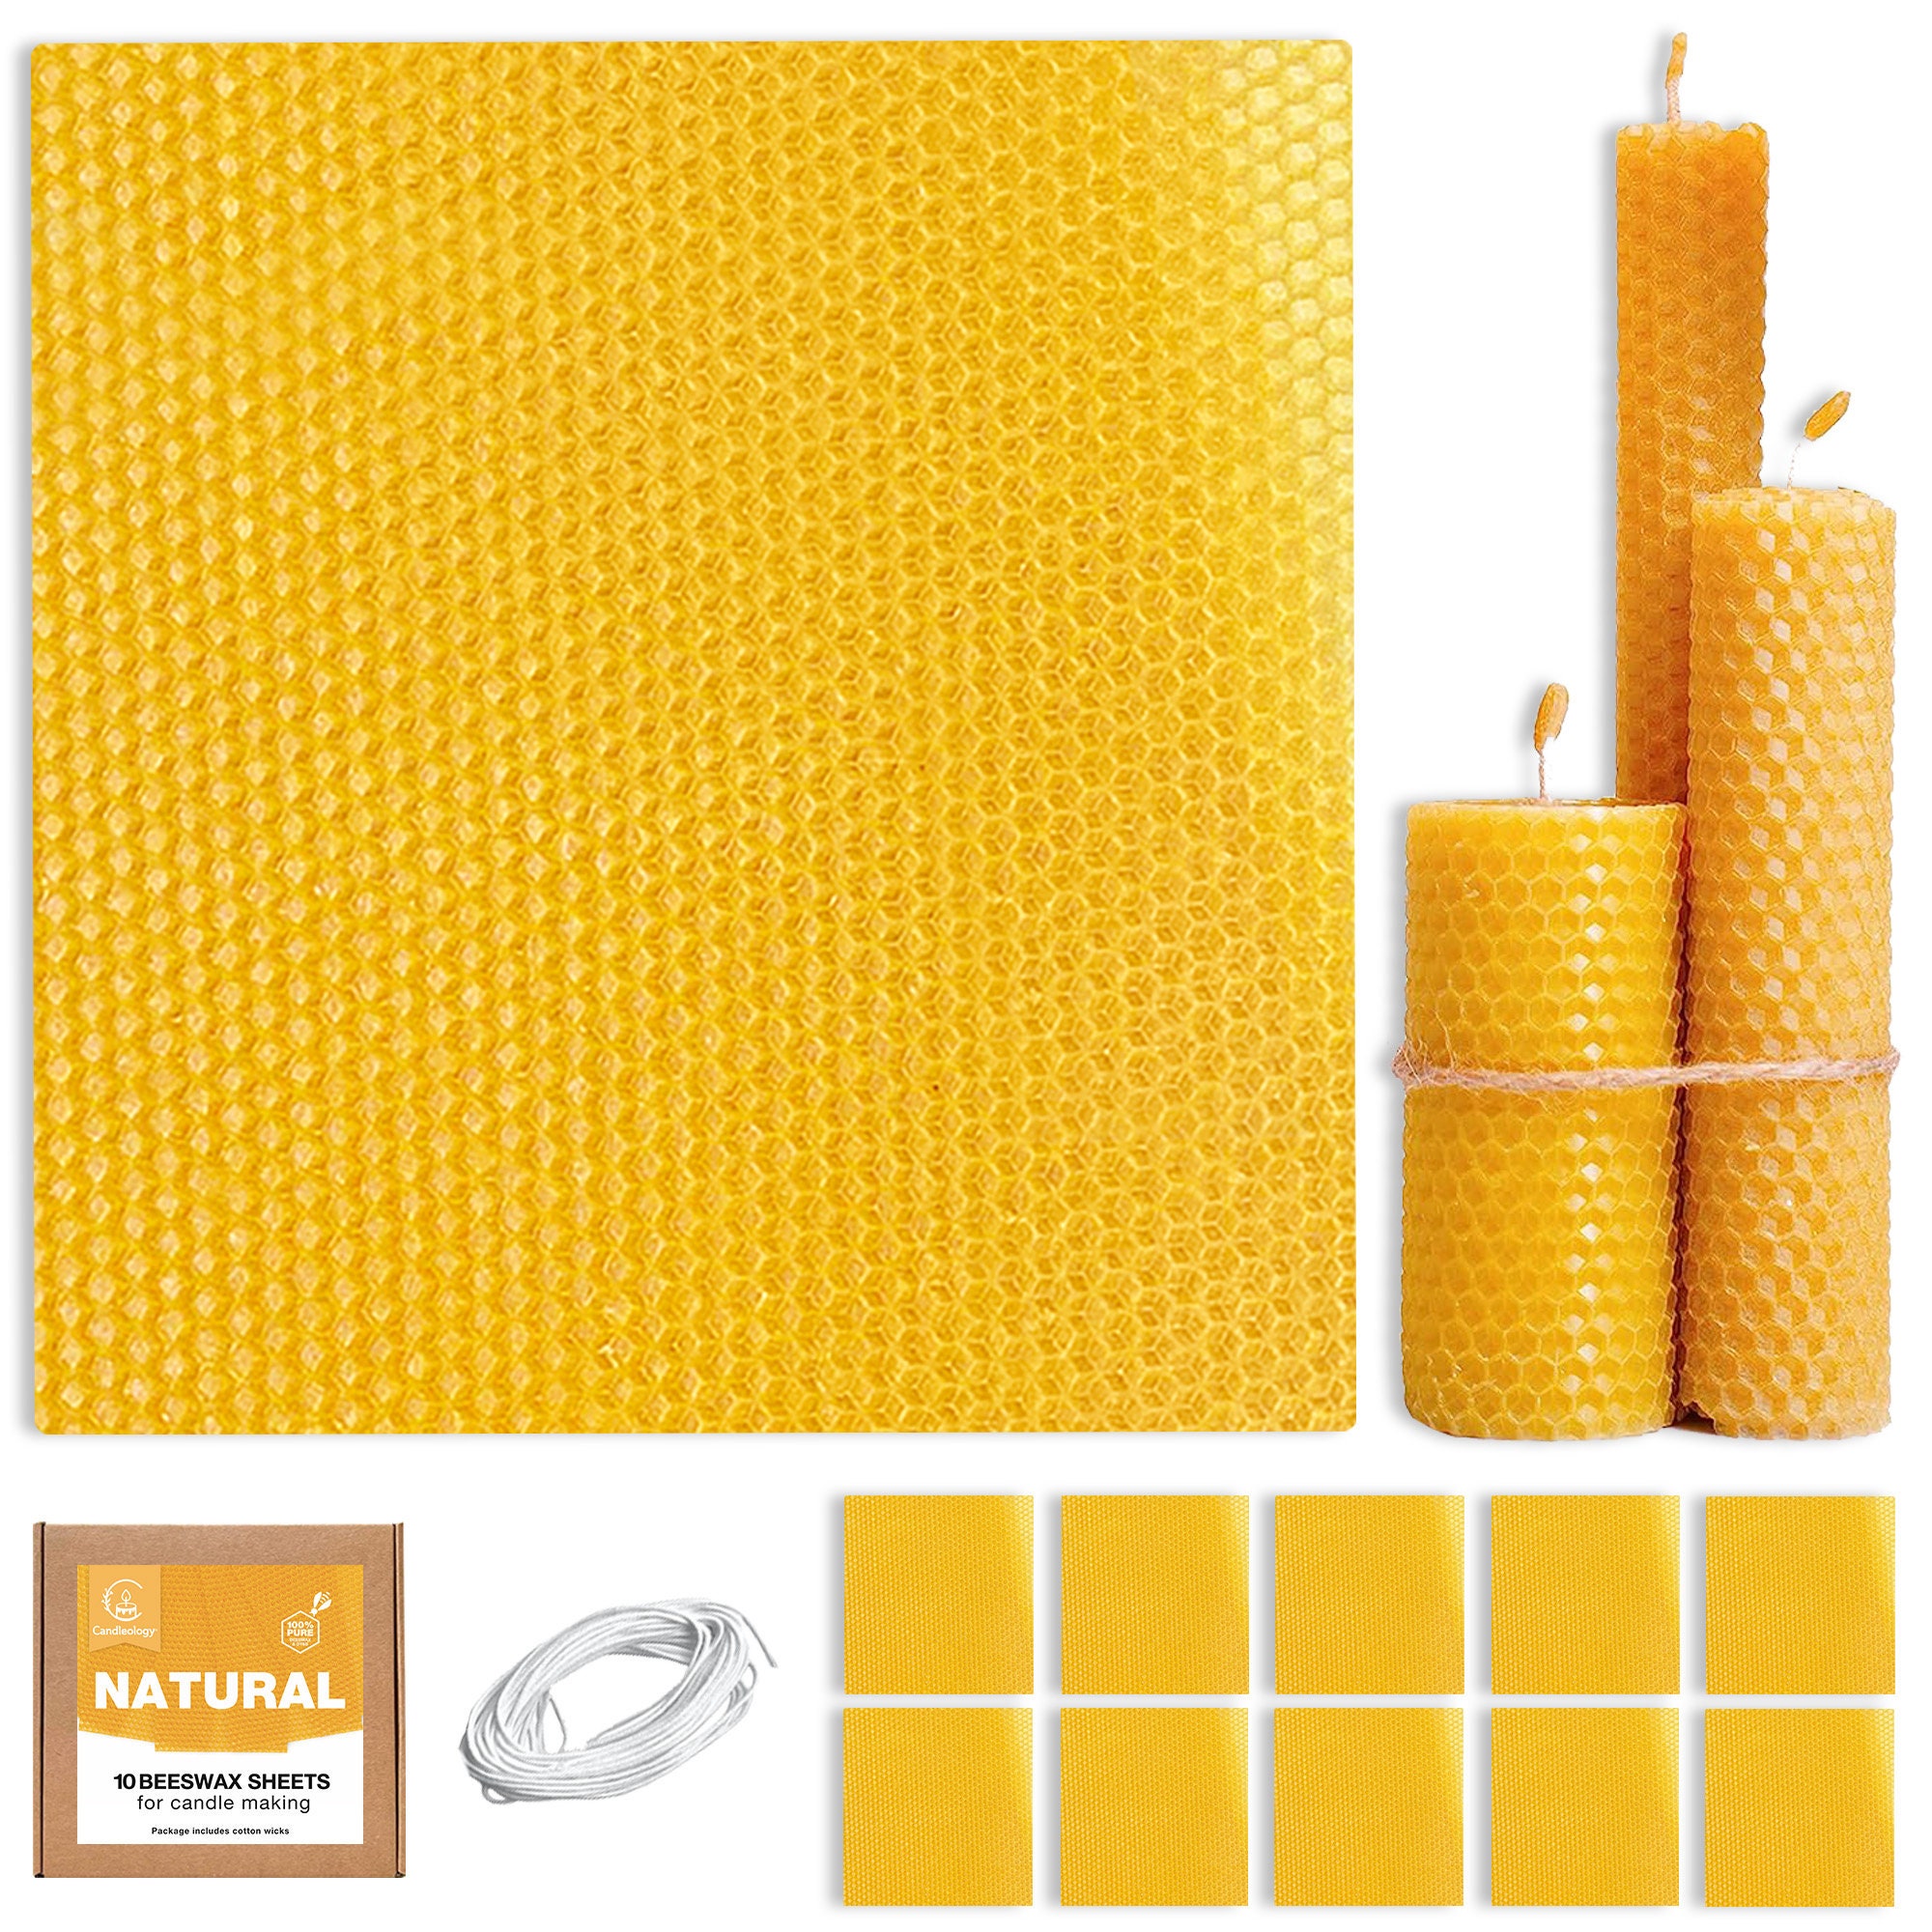 Natural Beeswax Sheets for Candle Making DIY Beeswax Candle Rolling Kit for  Kids & Adults by Candleology 